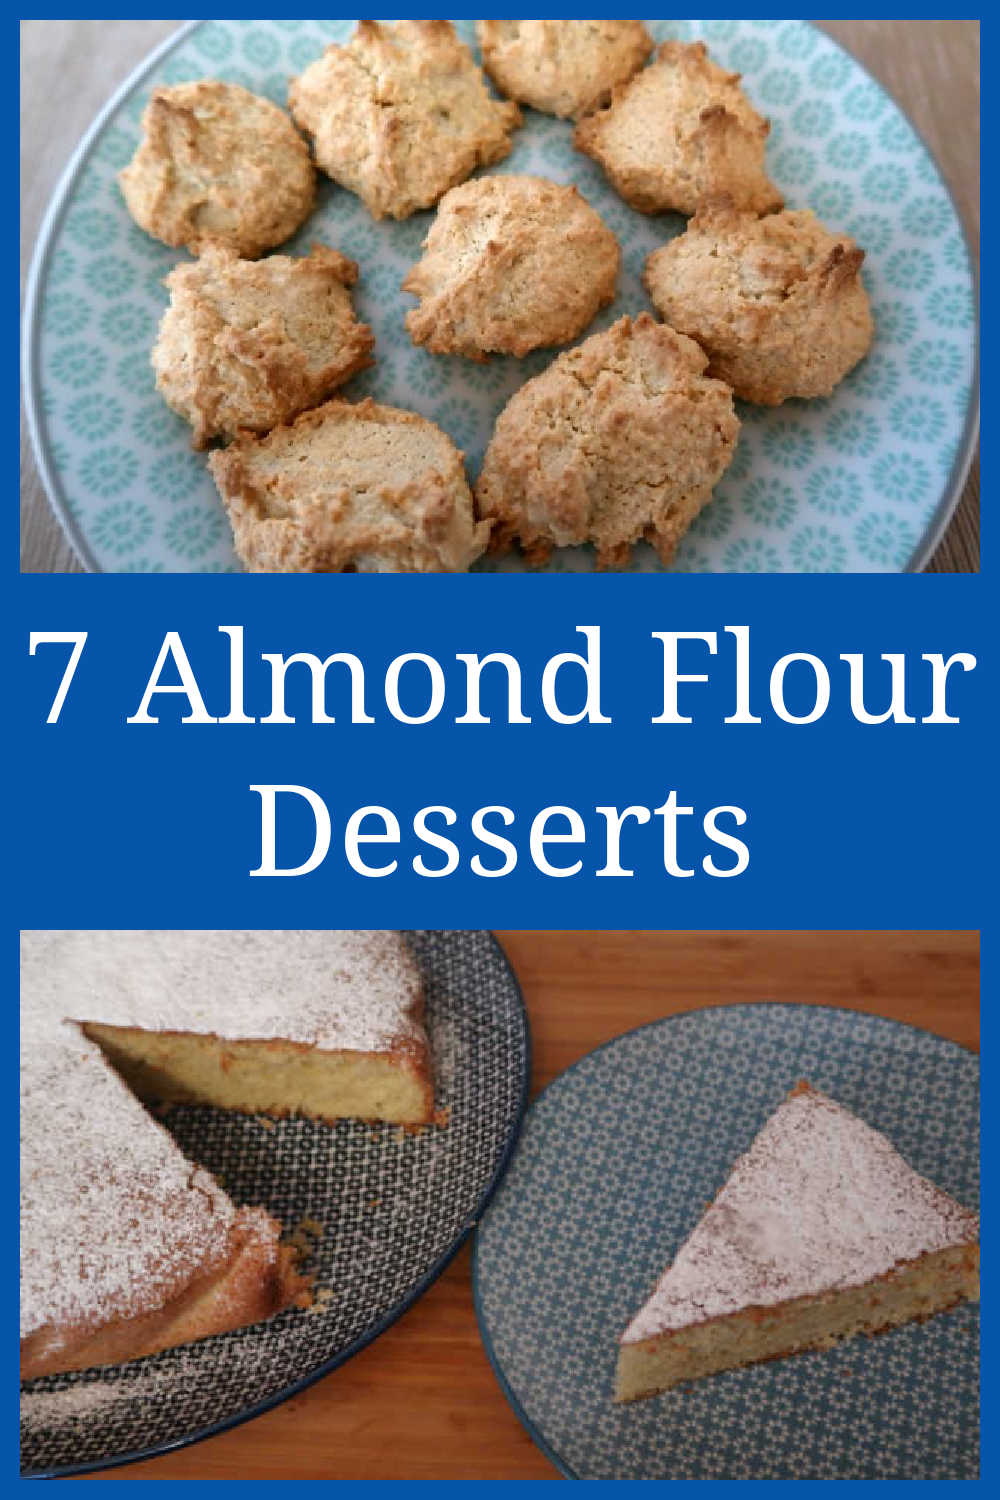 Almond Flour Desserts Recipes - The 7 Best Easy Gluten-Free Baking and Sweet Treats Ideas that are quick, healthy, sugar free and keto friendly too.